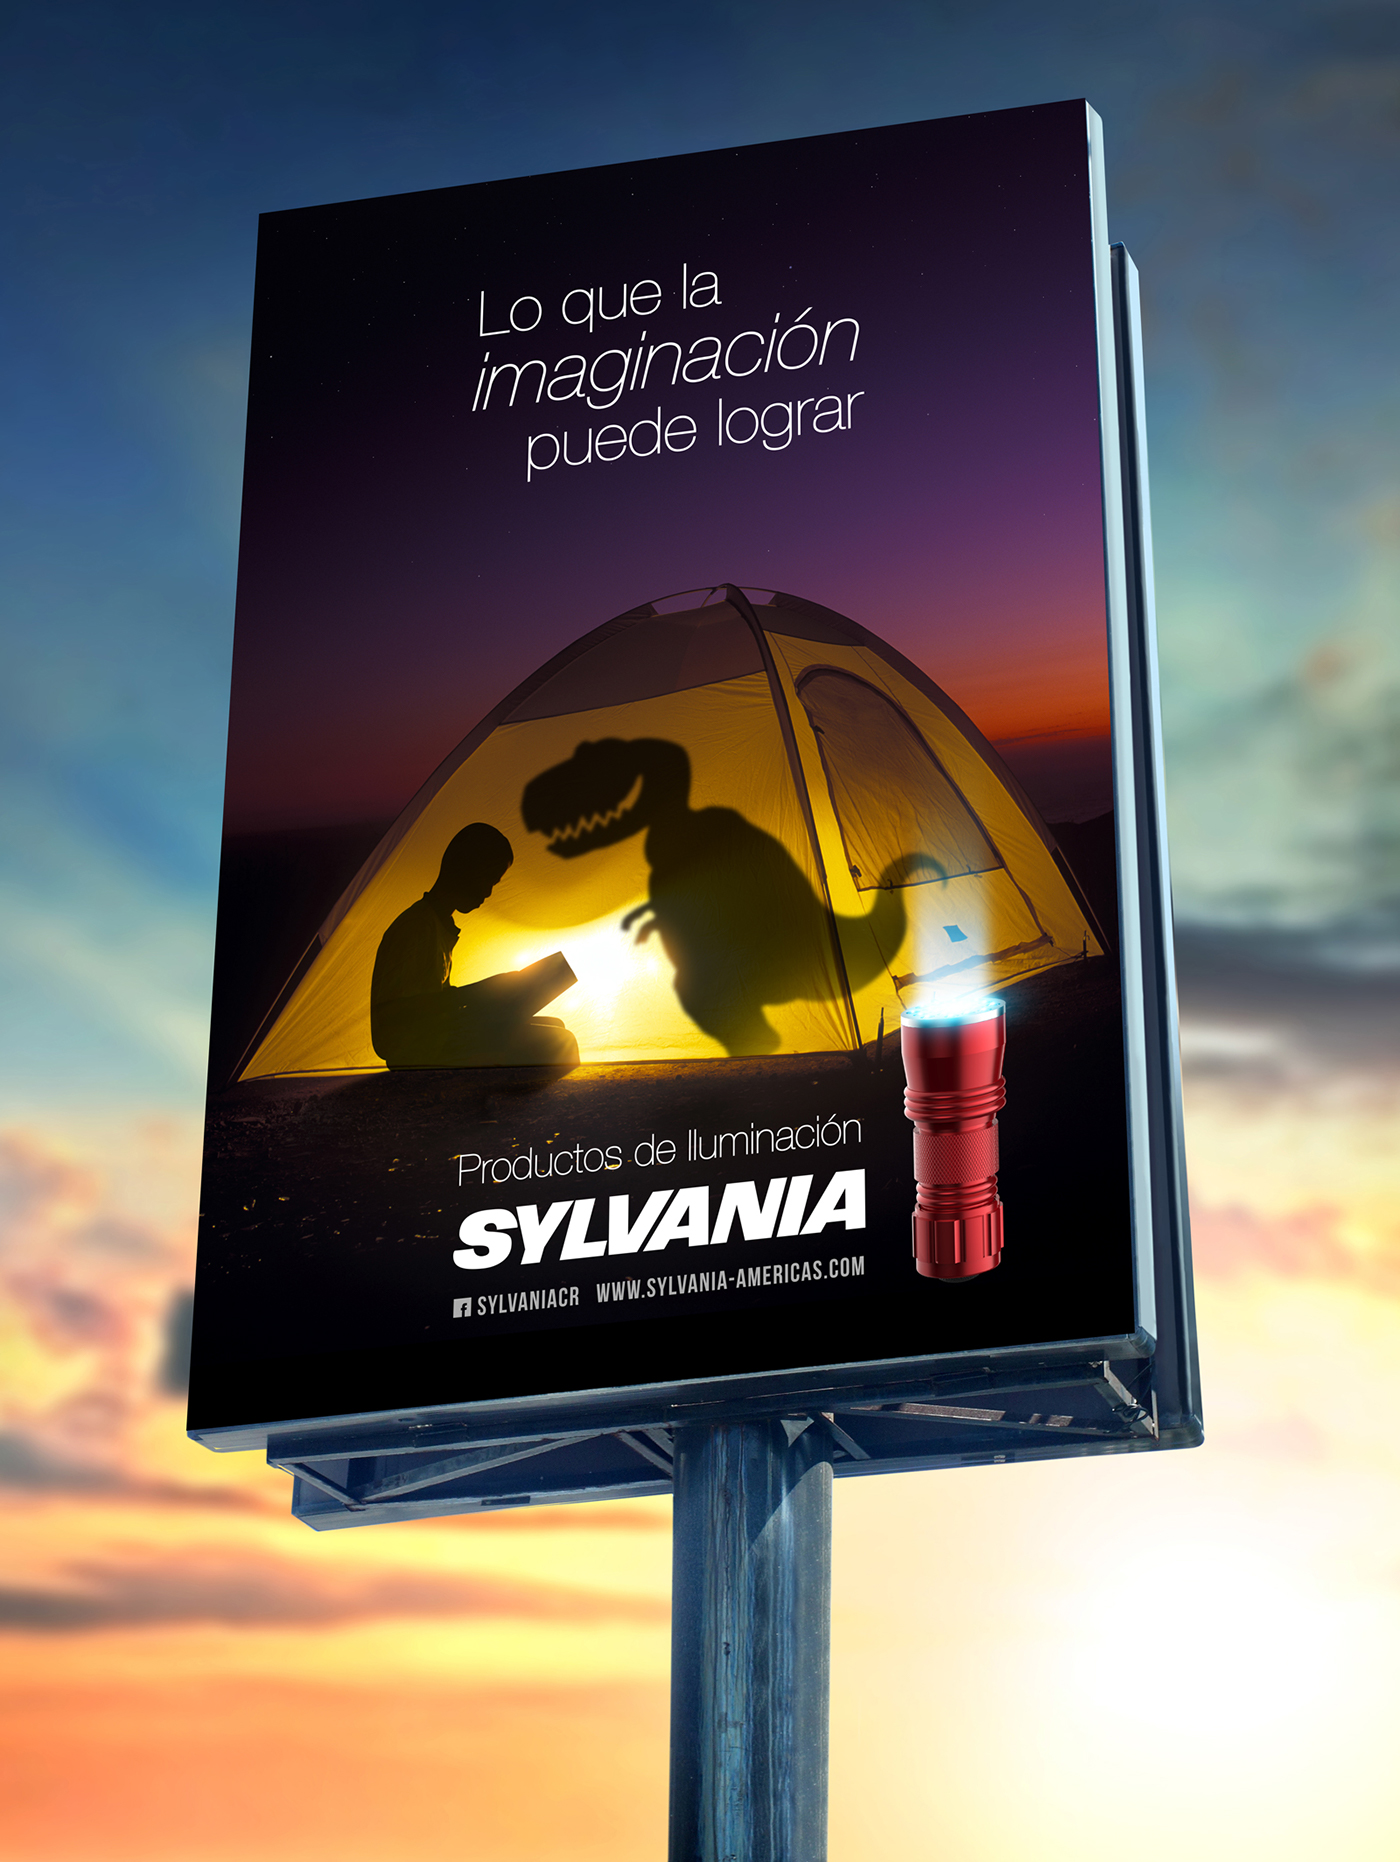 Advertising  lighting Fixtures led imagination Technology Outdoor media campaign